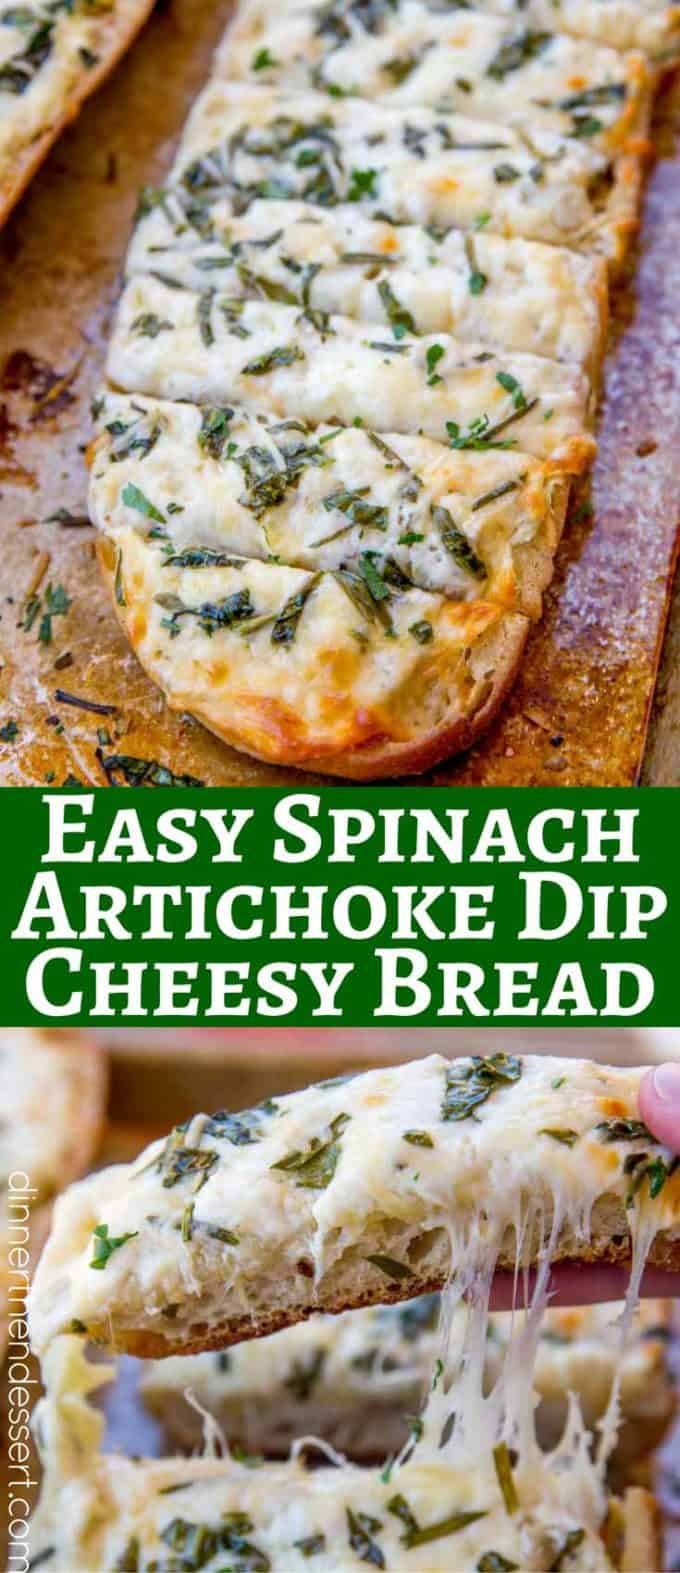 We loved this recipe for Spinach Artichoke Dip Cheesy Bread so much we made it twice in one week!